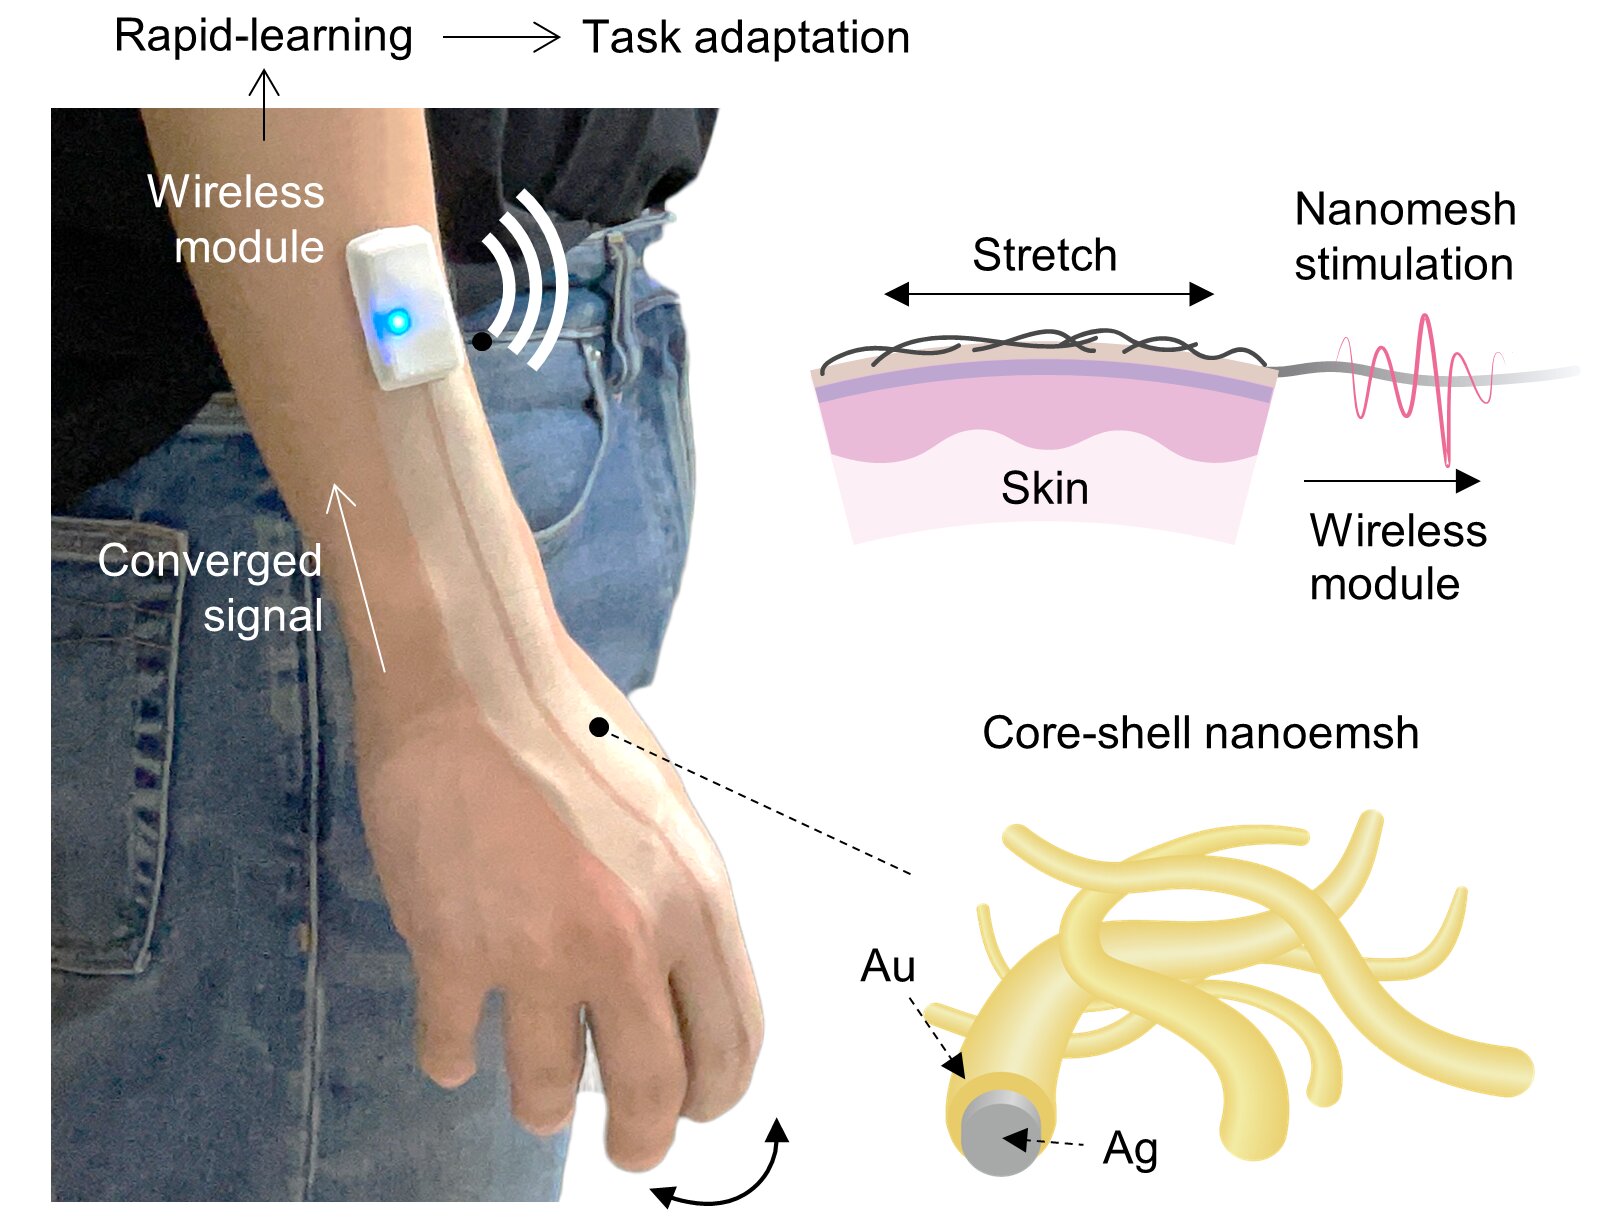 #Spray-on smart skin uses AI to rapidly understand hand tasks